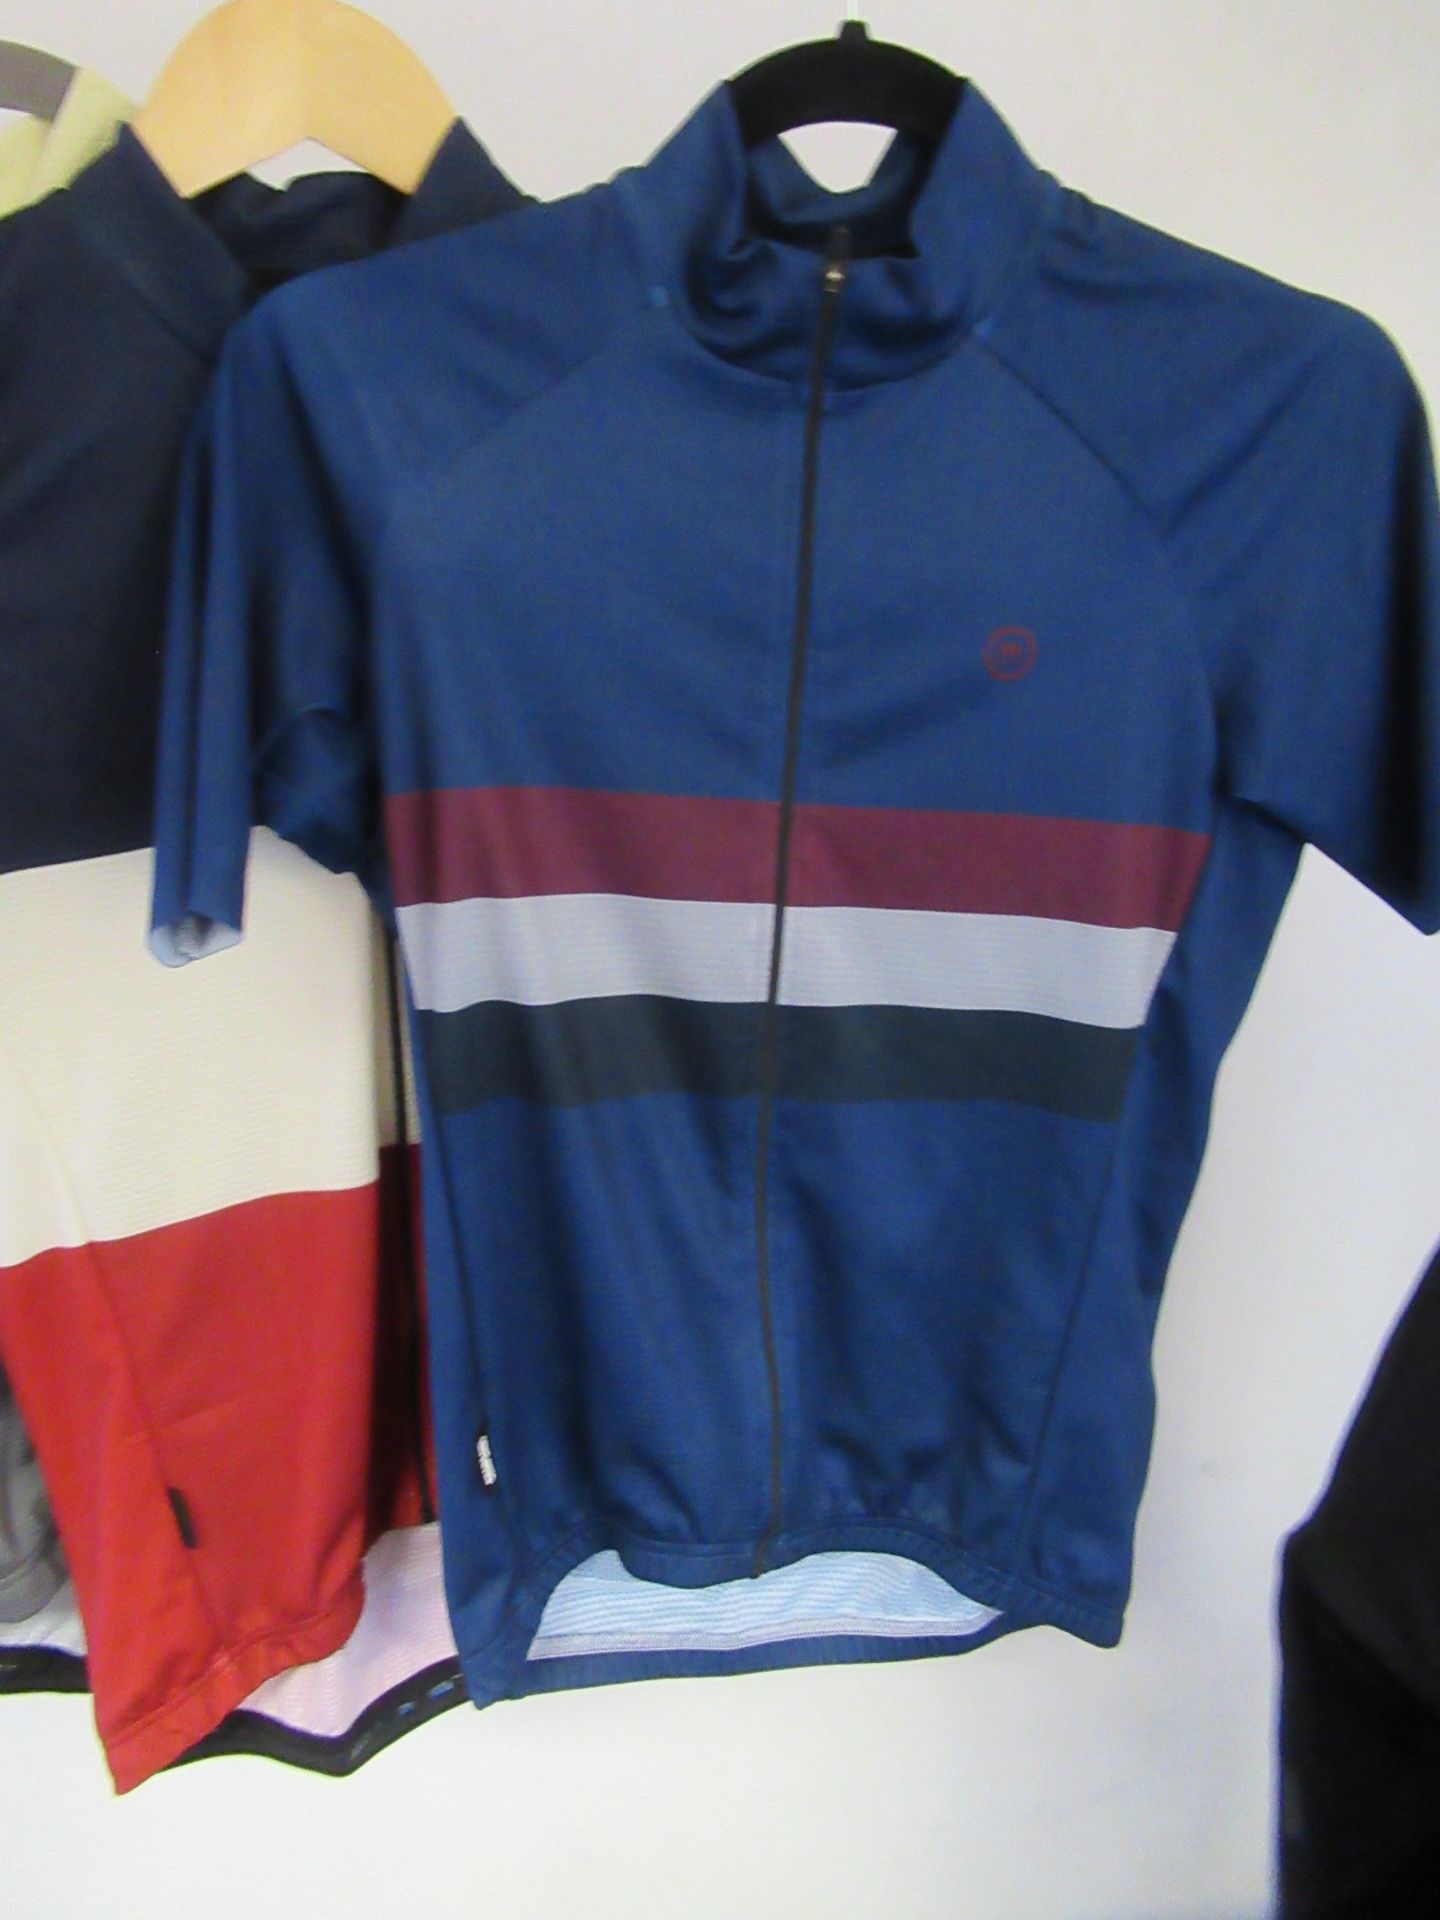 5x S Male Cycling Clothes - Image 3 of 6